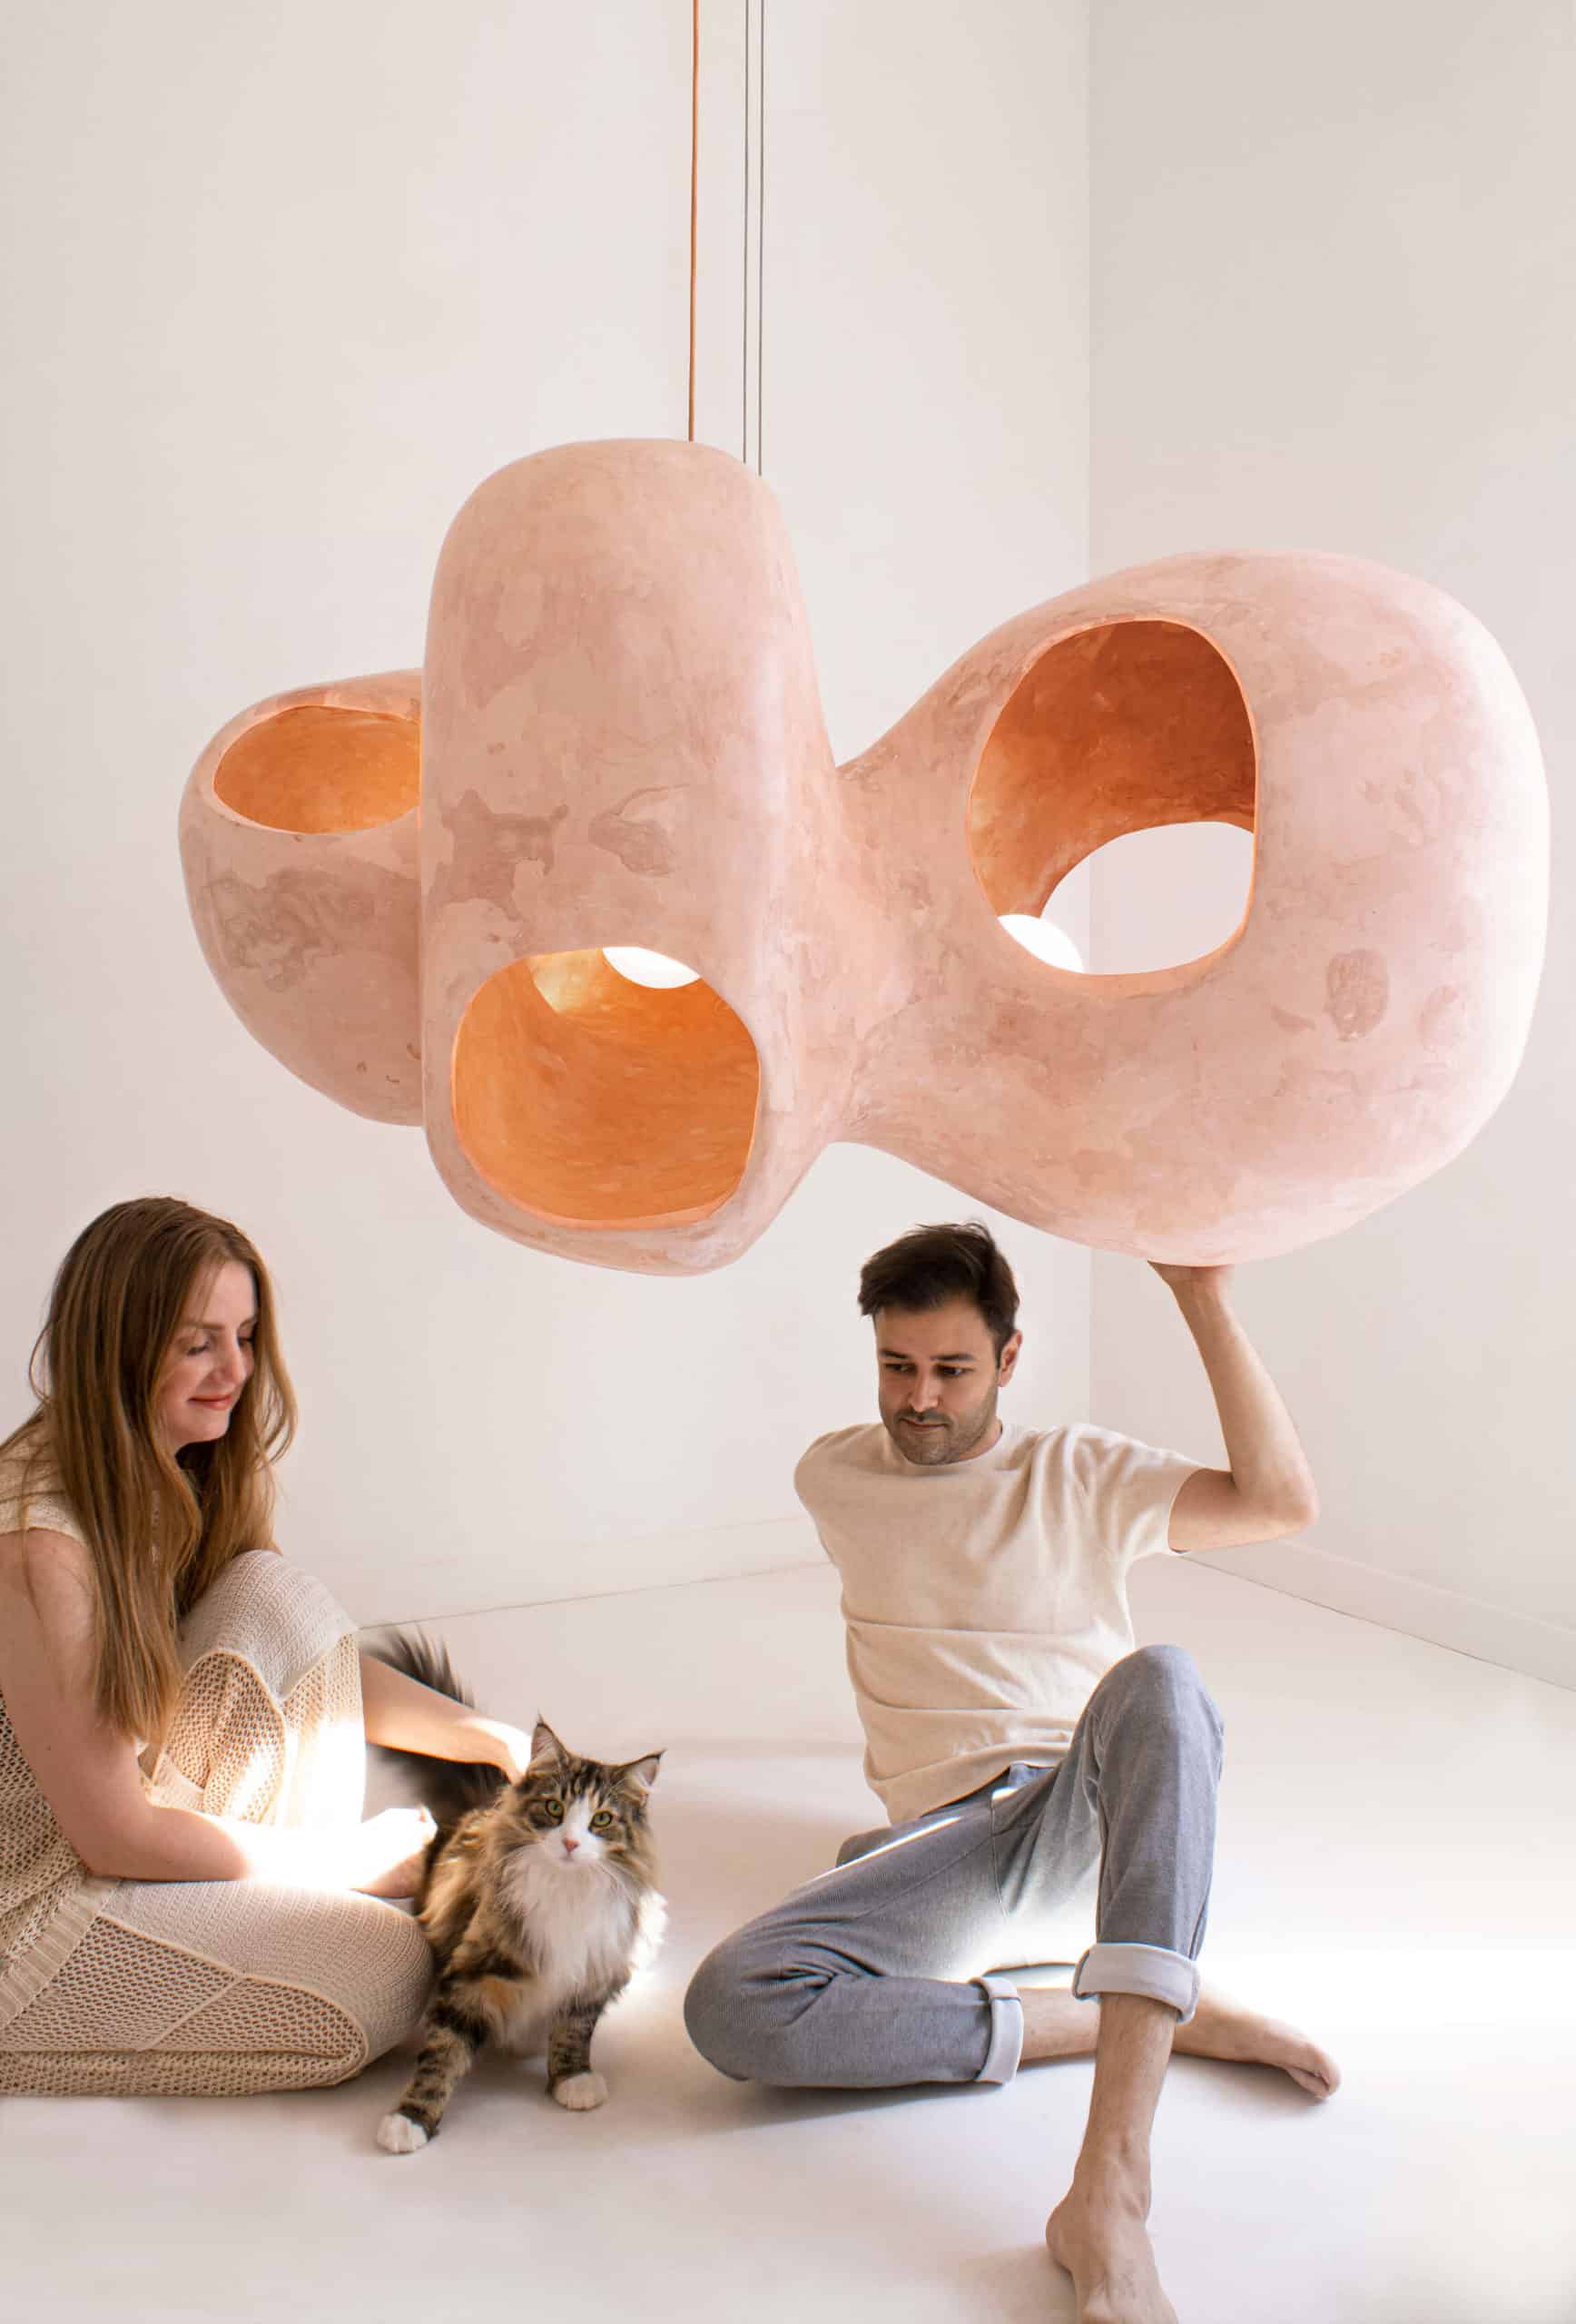 Explore Studio AOAO's 2023 collection, featuring collectible design, sculpture, and lighting pieces by artists Alicja Strzyzynska & Onur Iseri - the perfect addition to your interior.